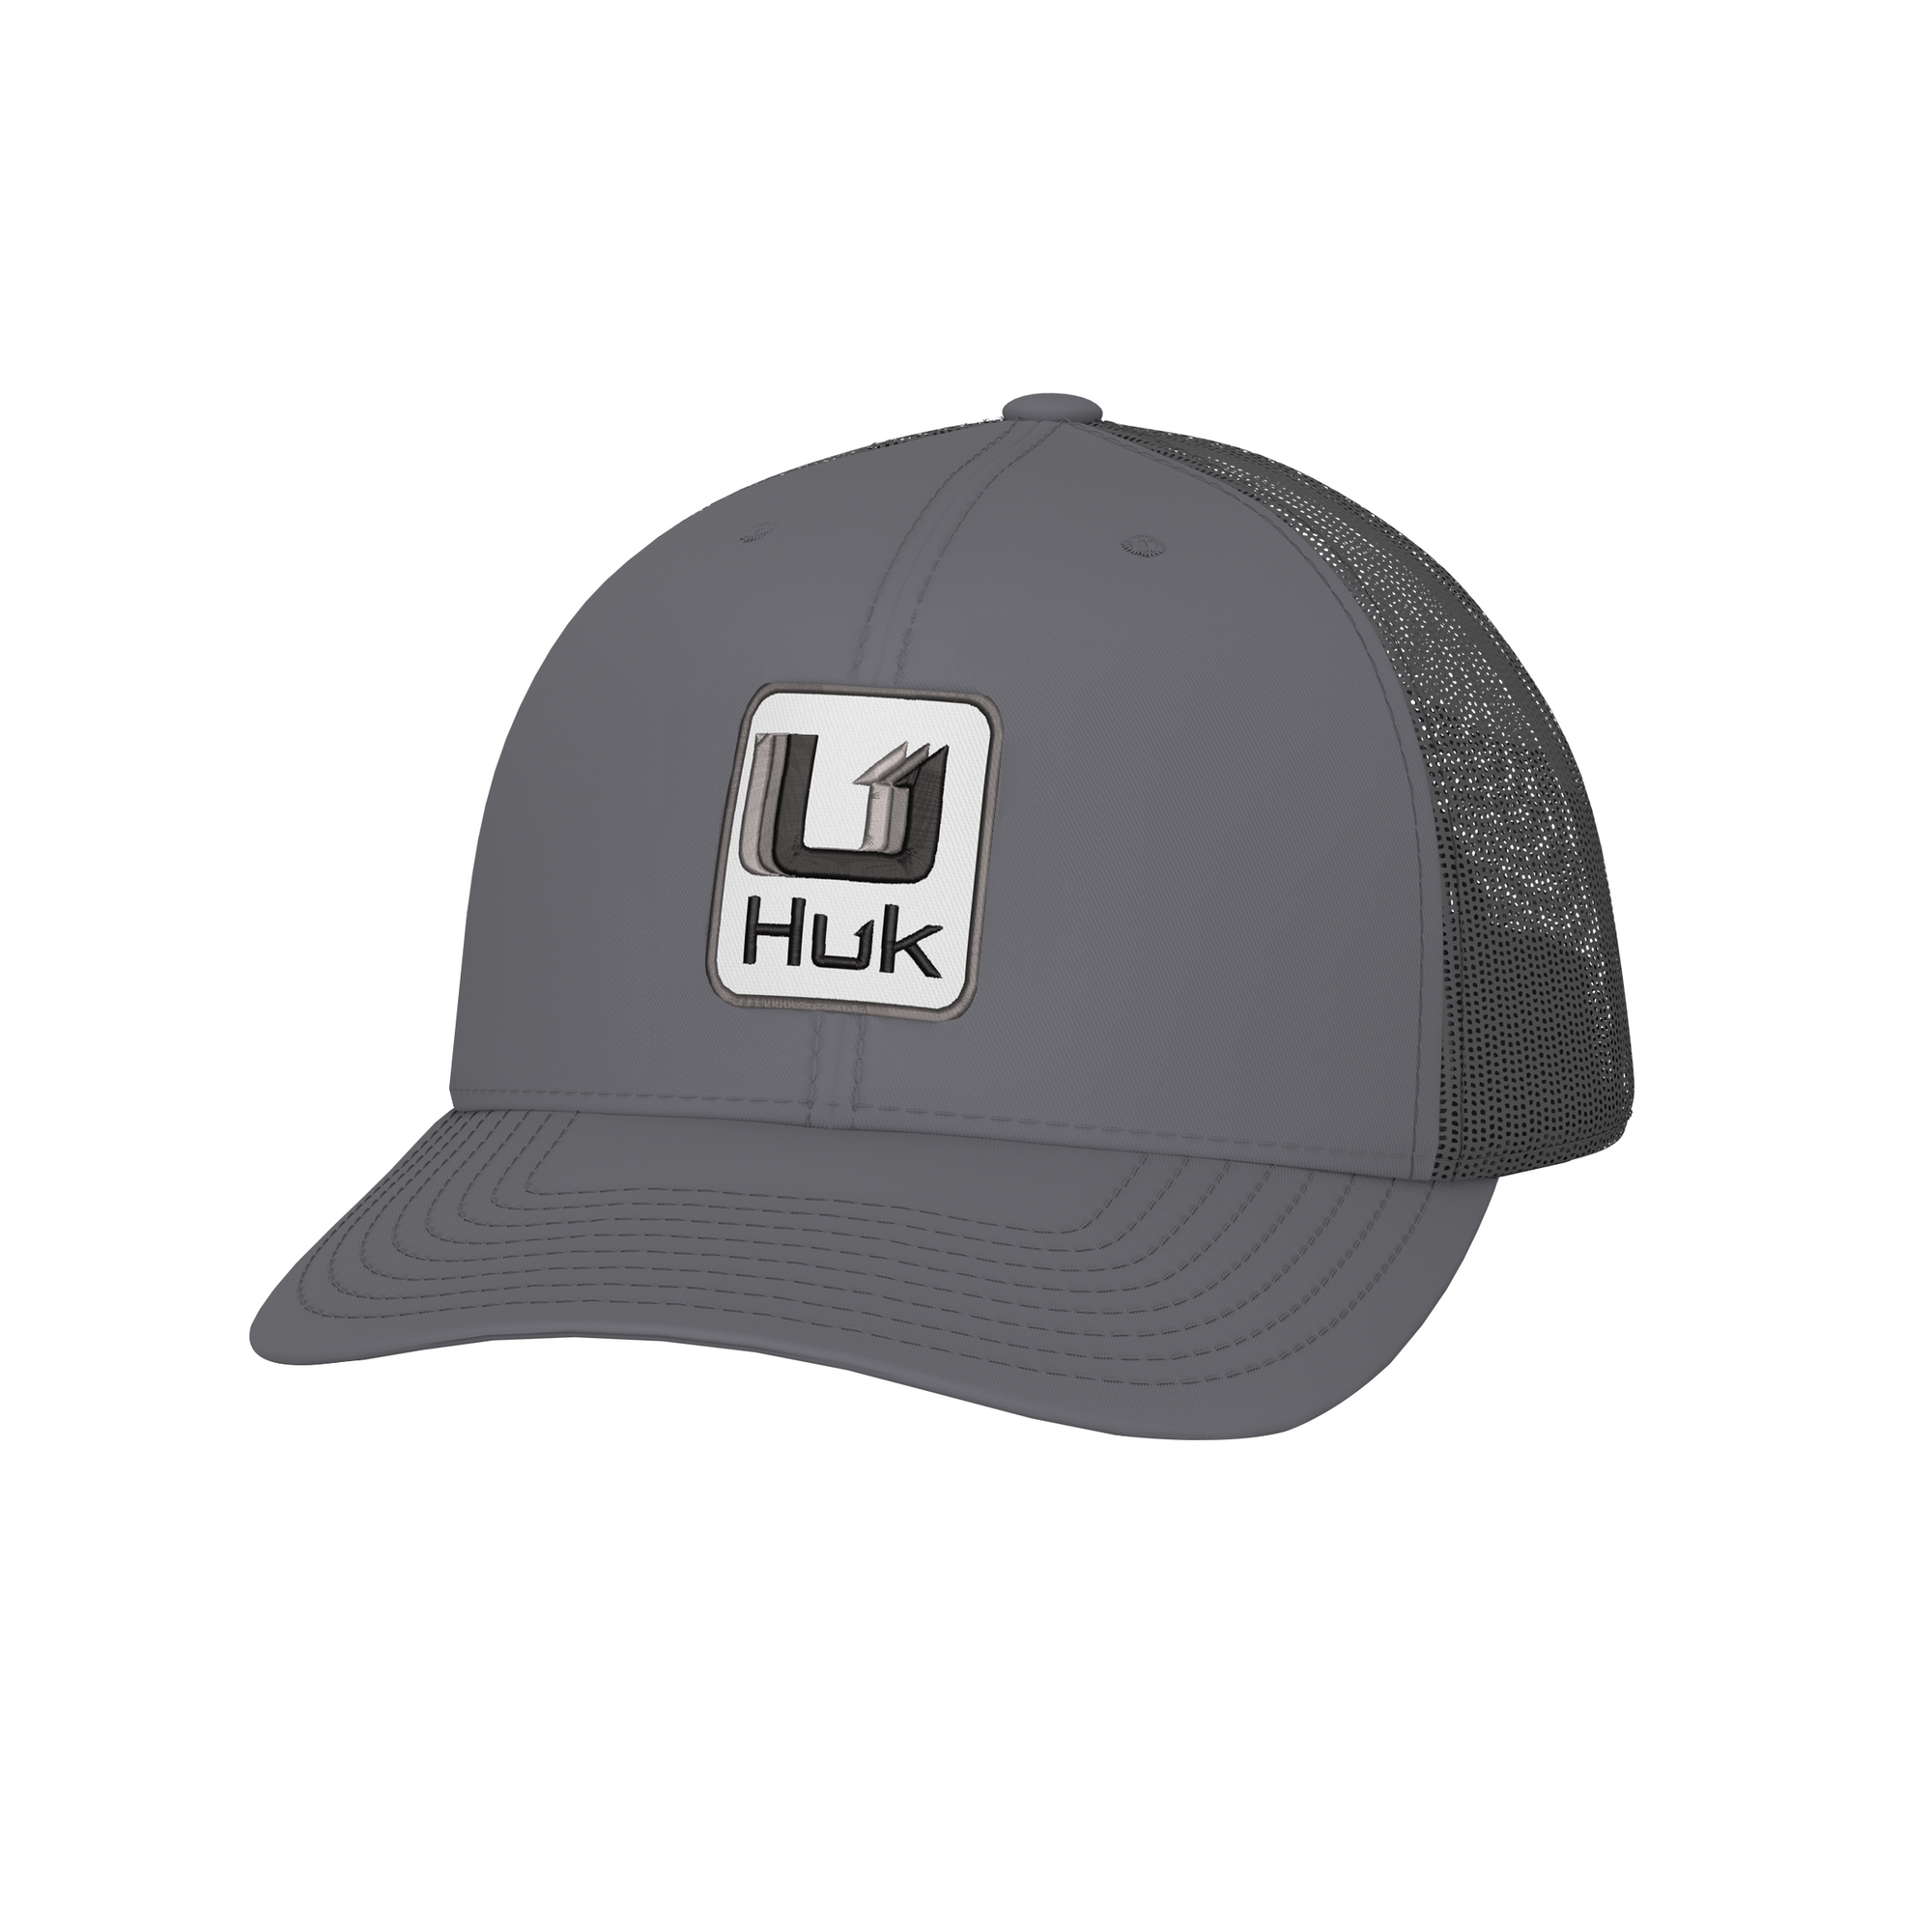 Huk Unstructured Performance Hat – Huk Gear